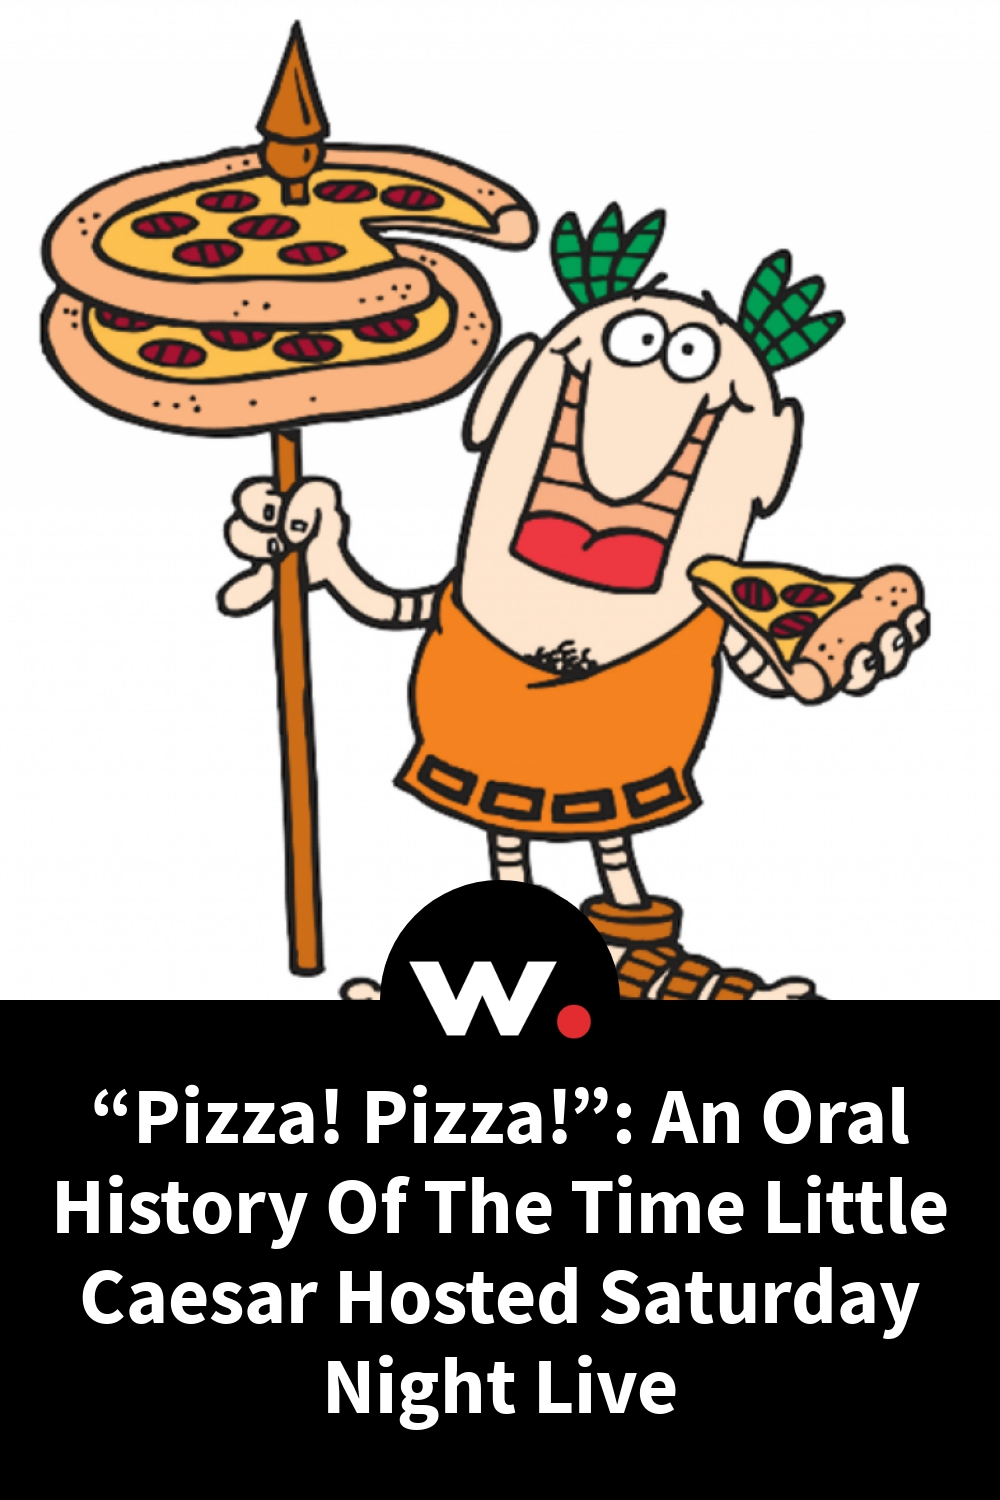 “Pizza! Pizza!”: An Oral History Of The Time Little Caesar Hosted Saturday Night Live